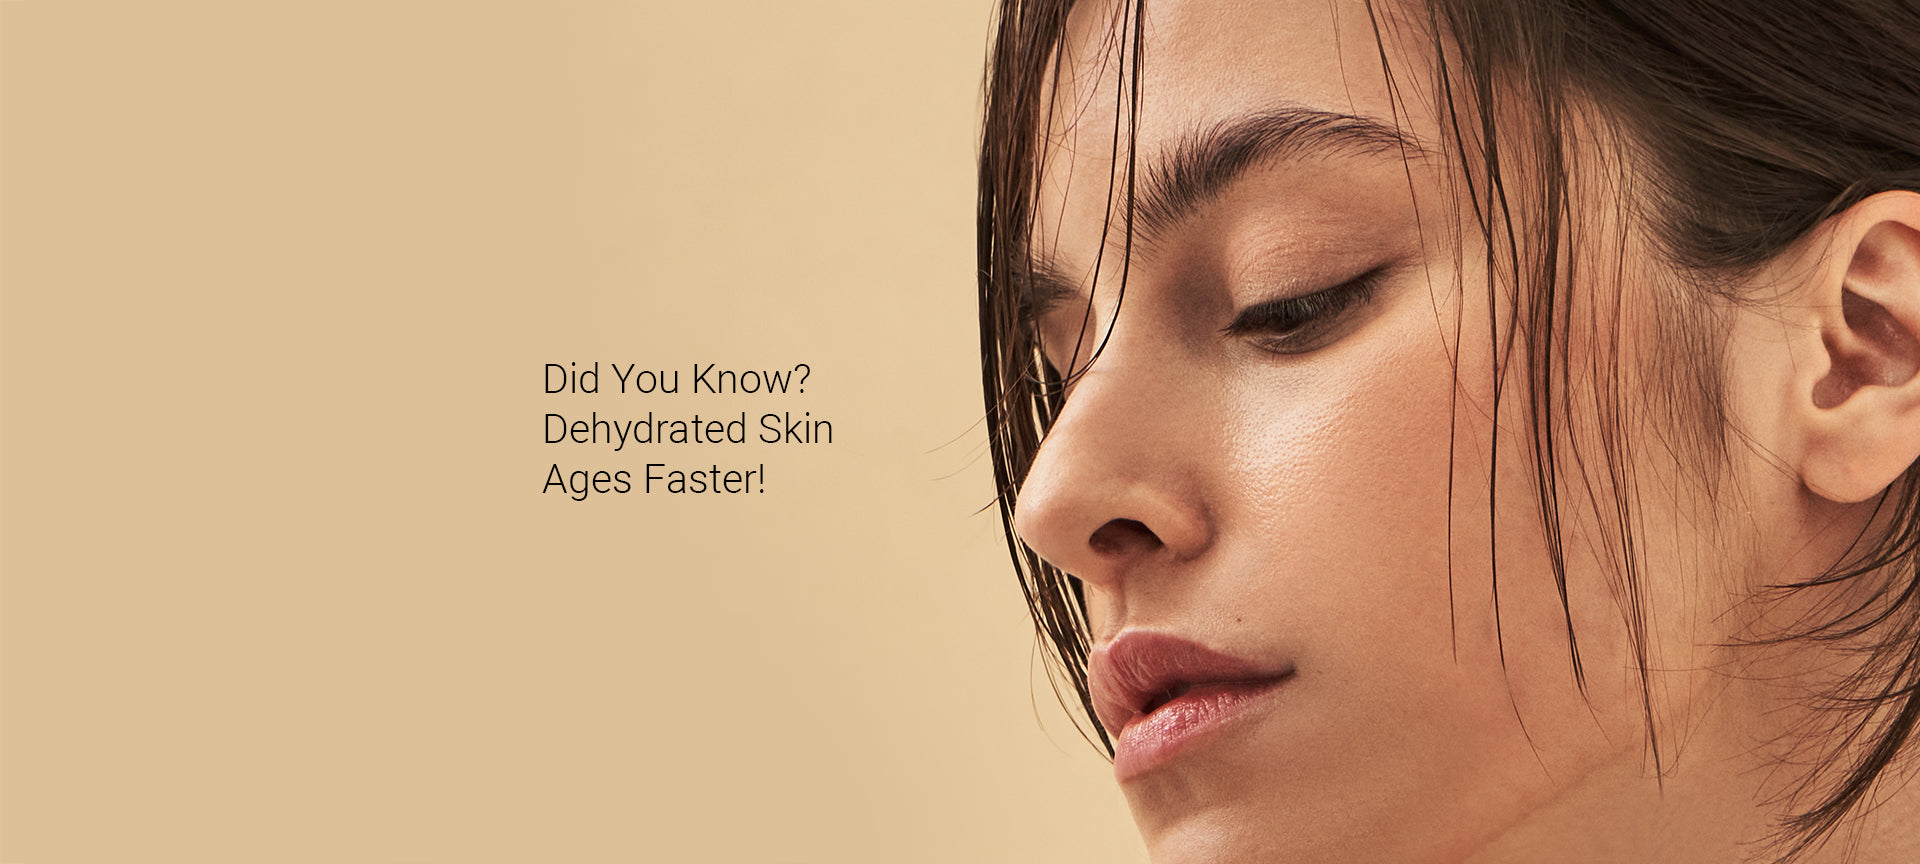 Keep Your Skin Hydrated On the Go!